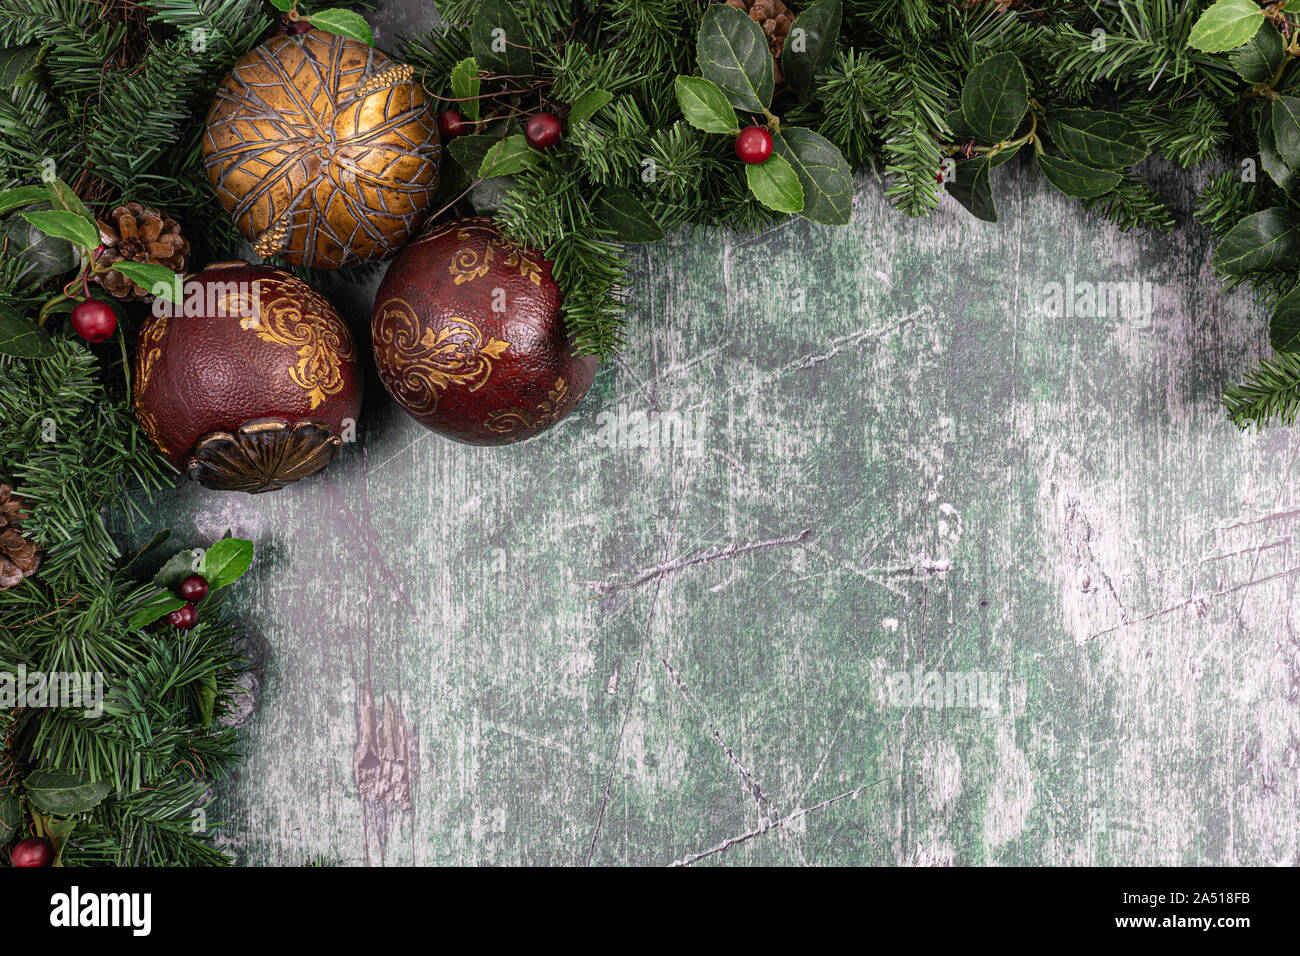 Christmas greenery and decorations against a rustic wood backdrop